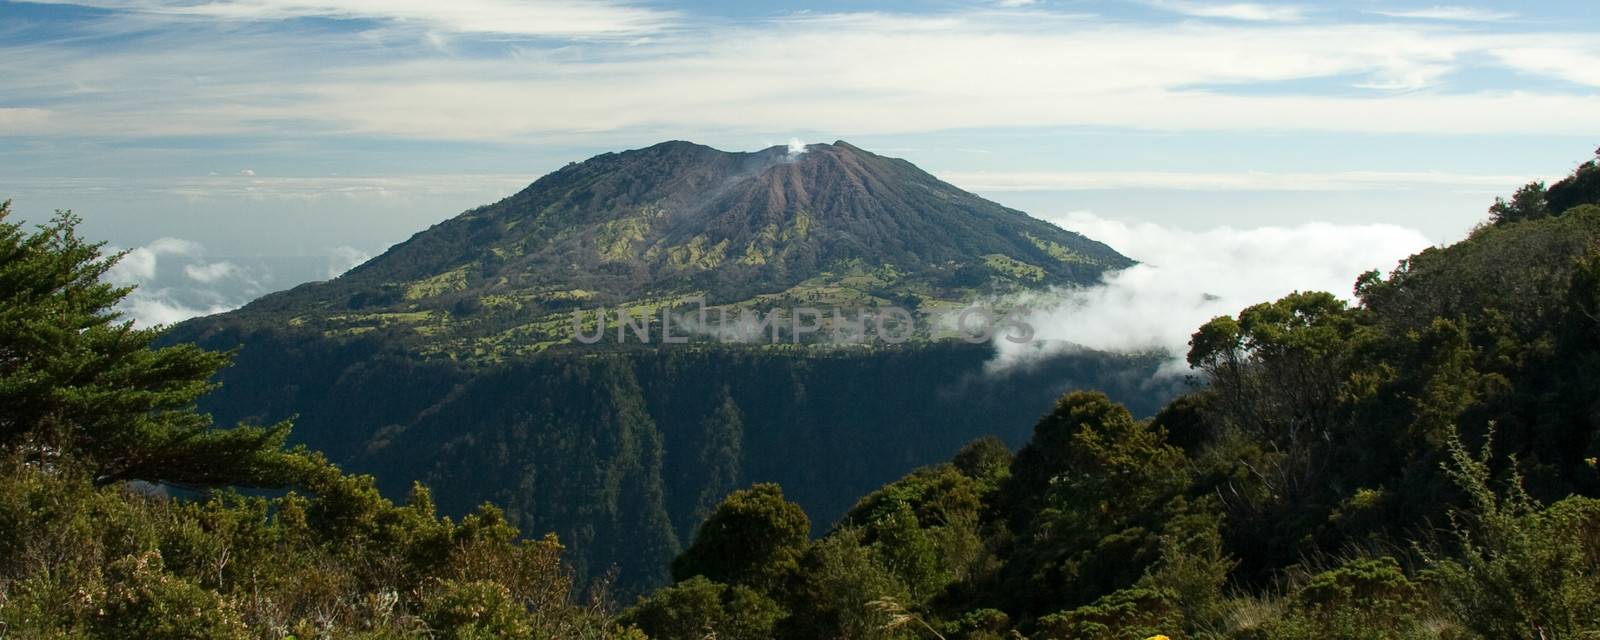 The Turrialba Volcano seen from behind the Iraz�� Volcano in Costa Rica.